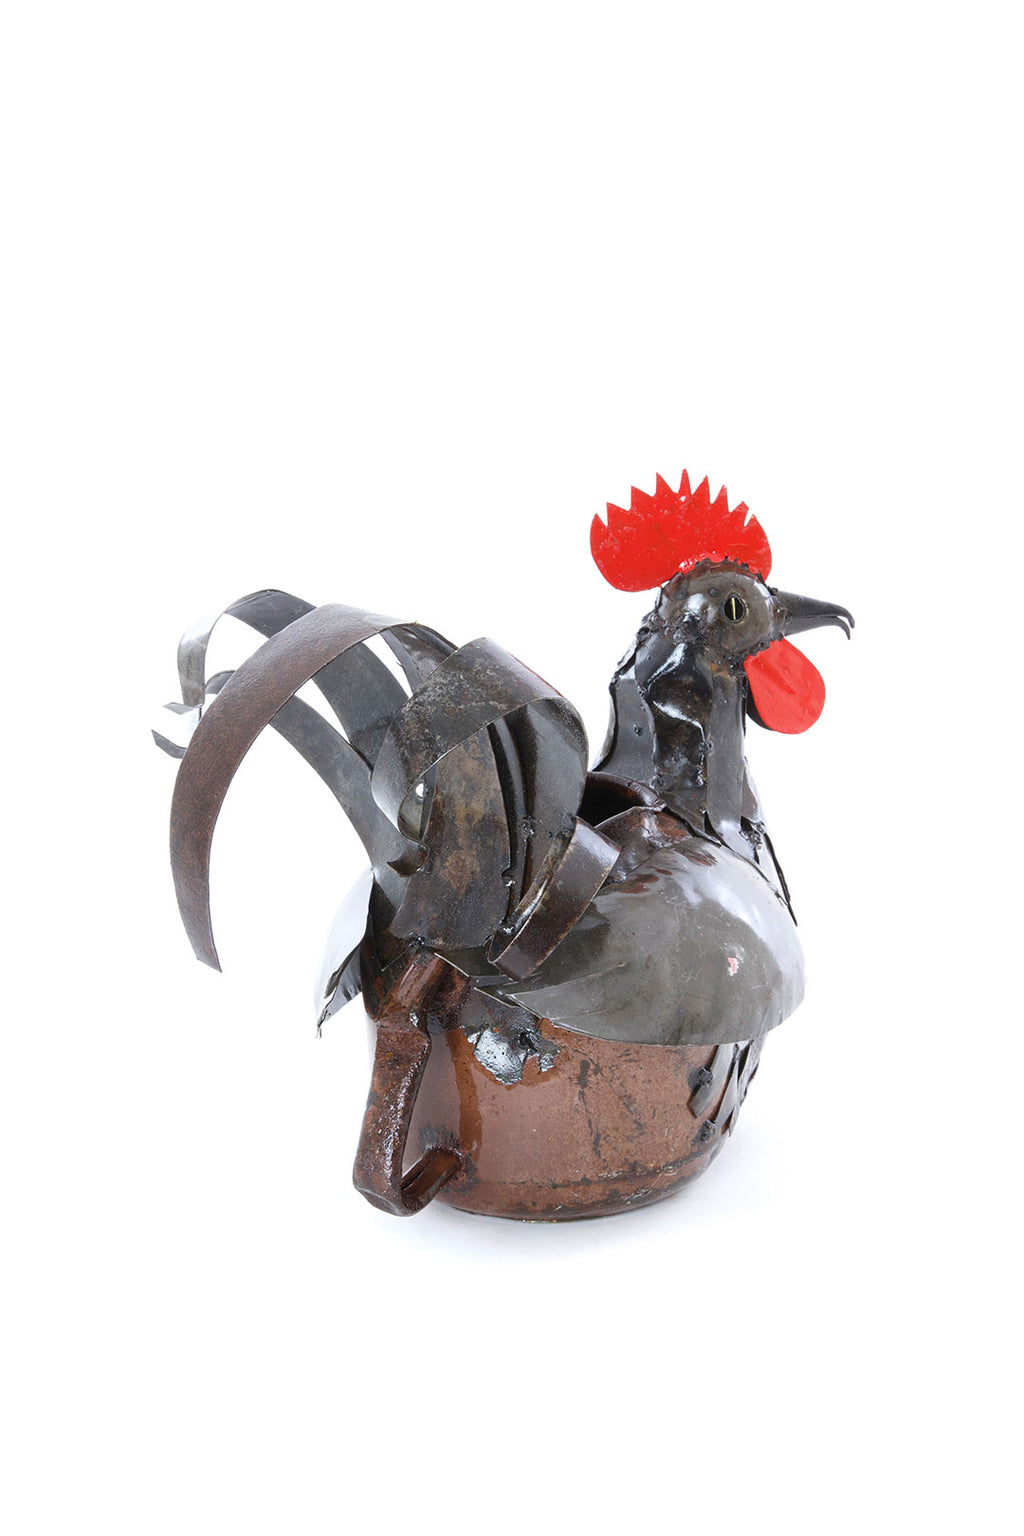 Small Sitting Rooster Teapot Planter from Zimbabwe